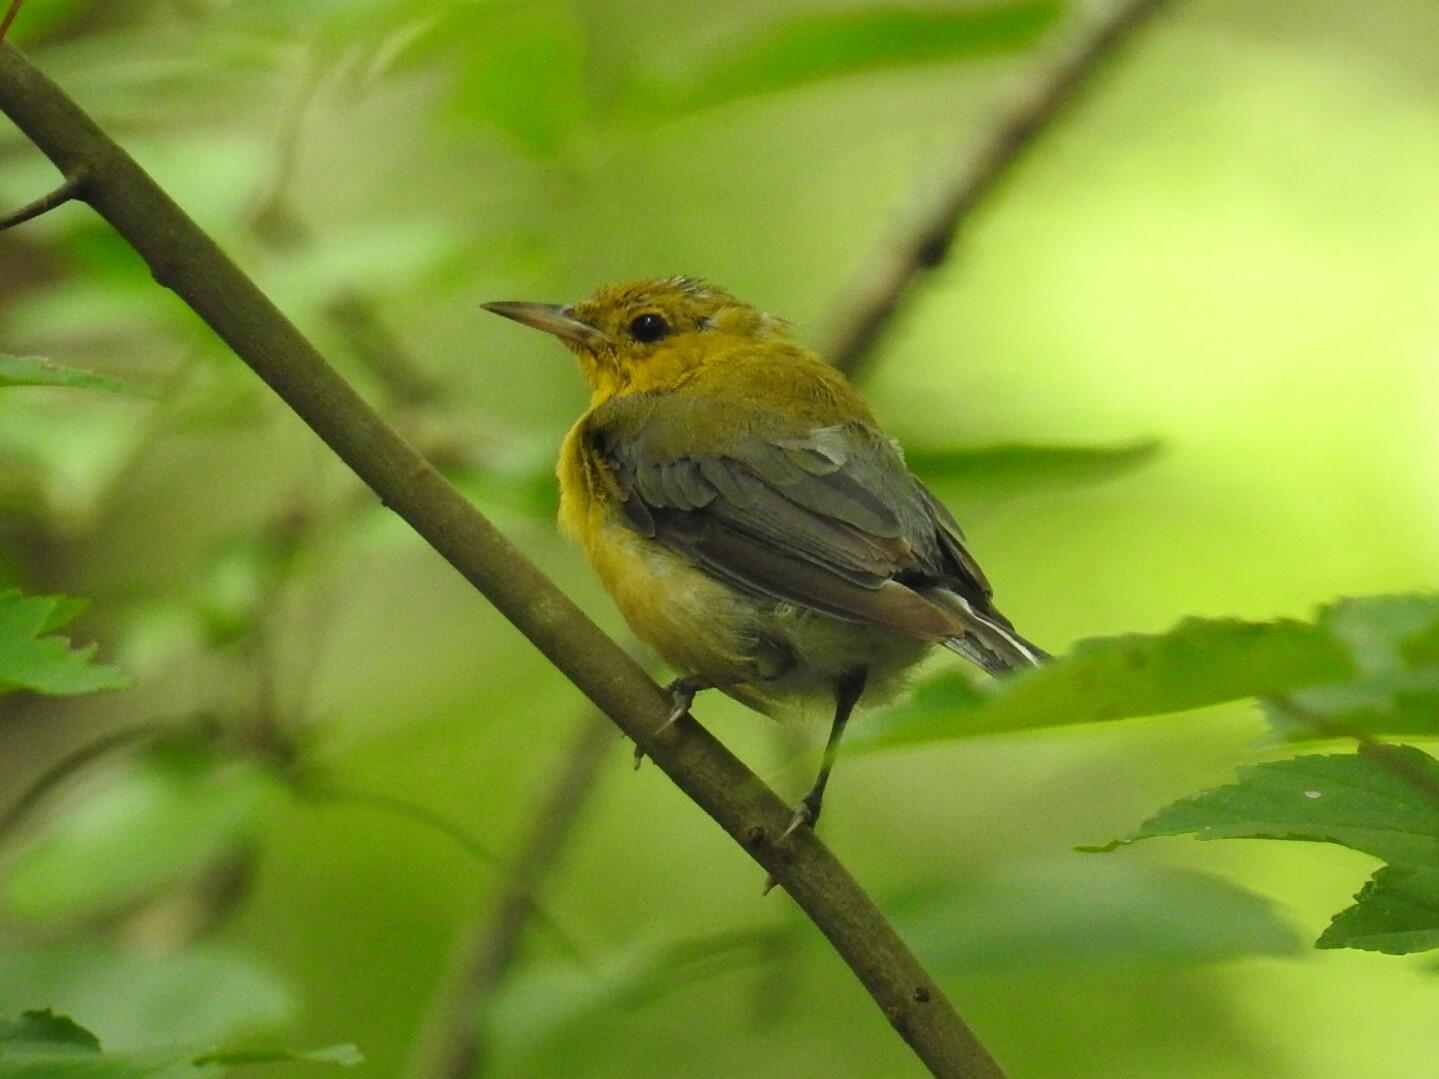 A juvenile Prothonotary Warbler rests on a branch while looking back at us. The feathers on its head are still not fully formed, but it won't be long until it starts its 2,400 mile migration south in the fall.